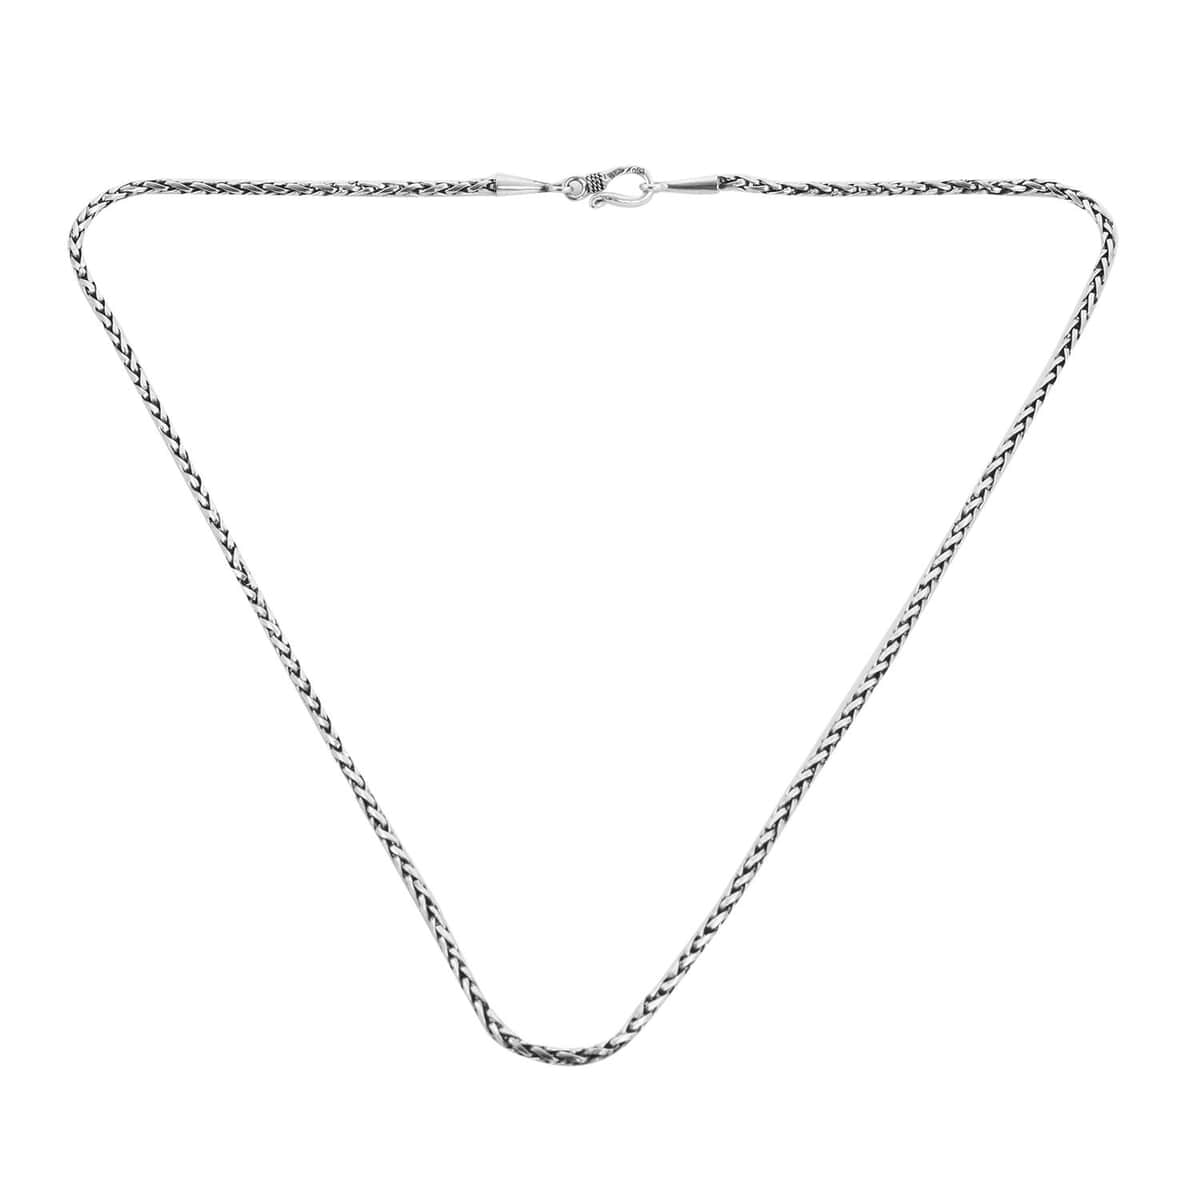 Bali Legacy Padian Chain Necklace, Silver Padian Necklace, Sterling Silver Chain Necklace, 22 Inch Necklace 19.9 Grams image number 3